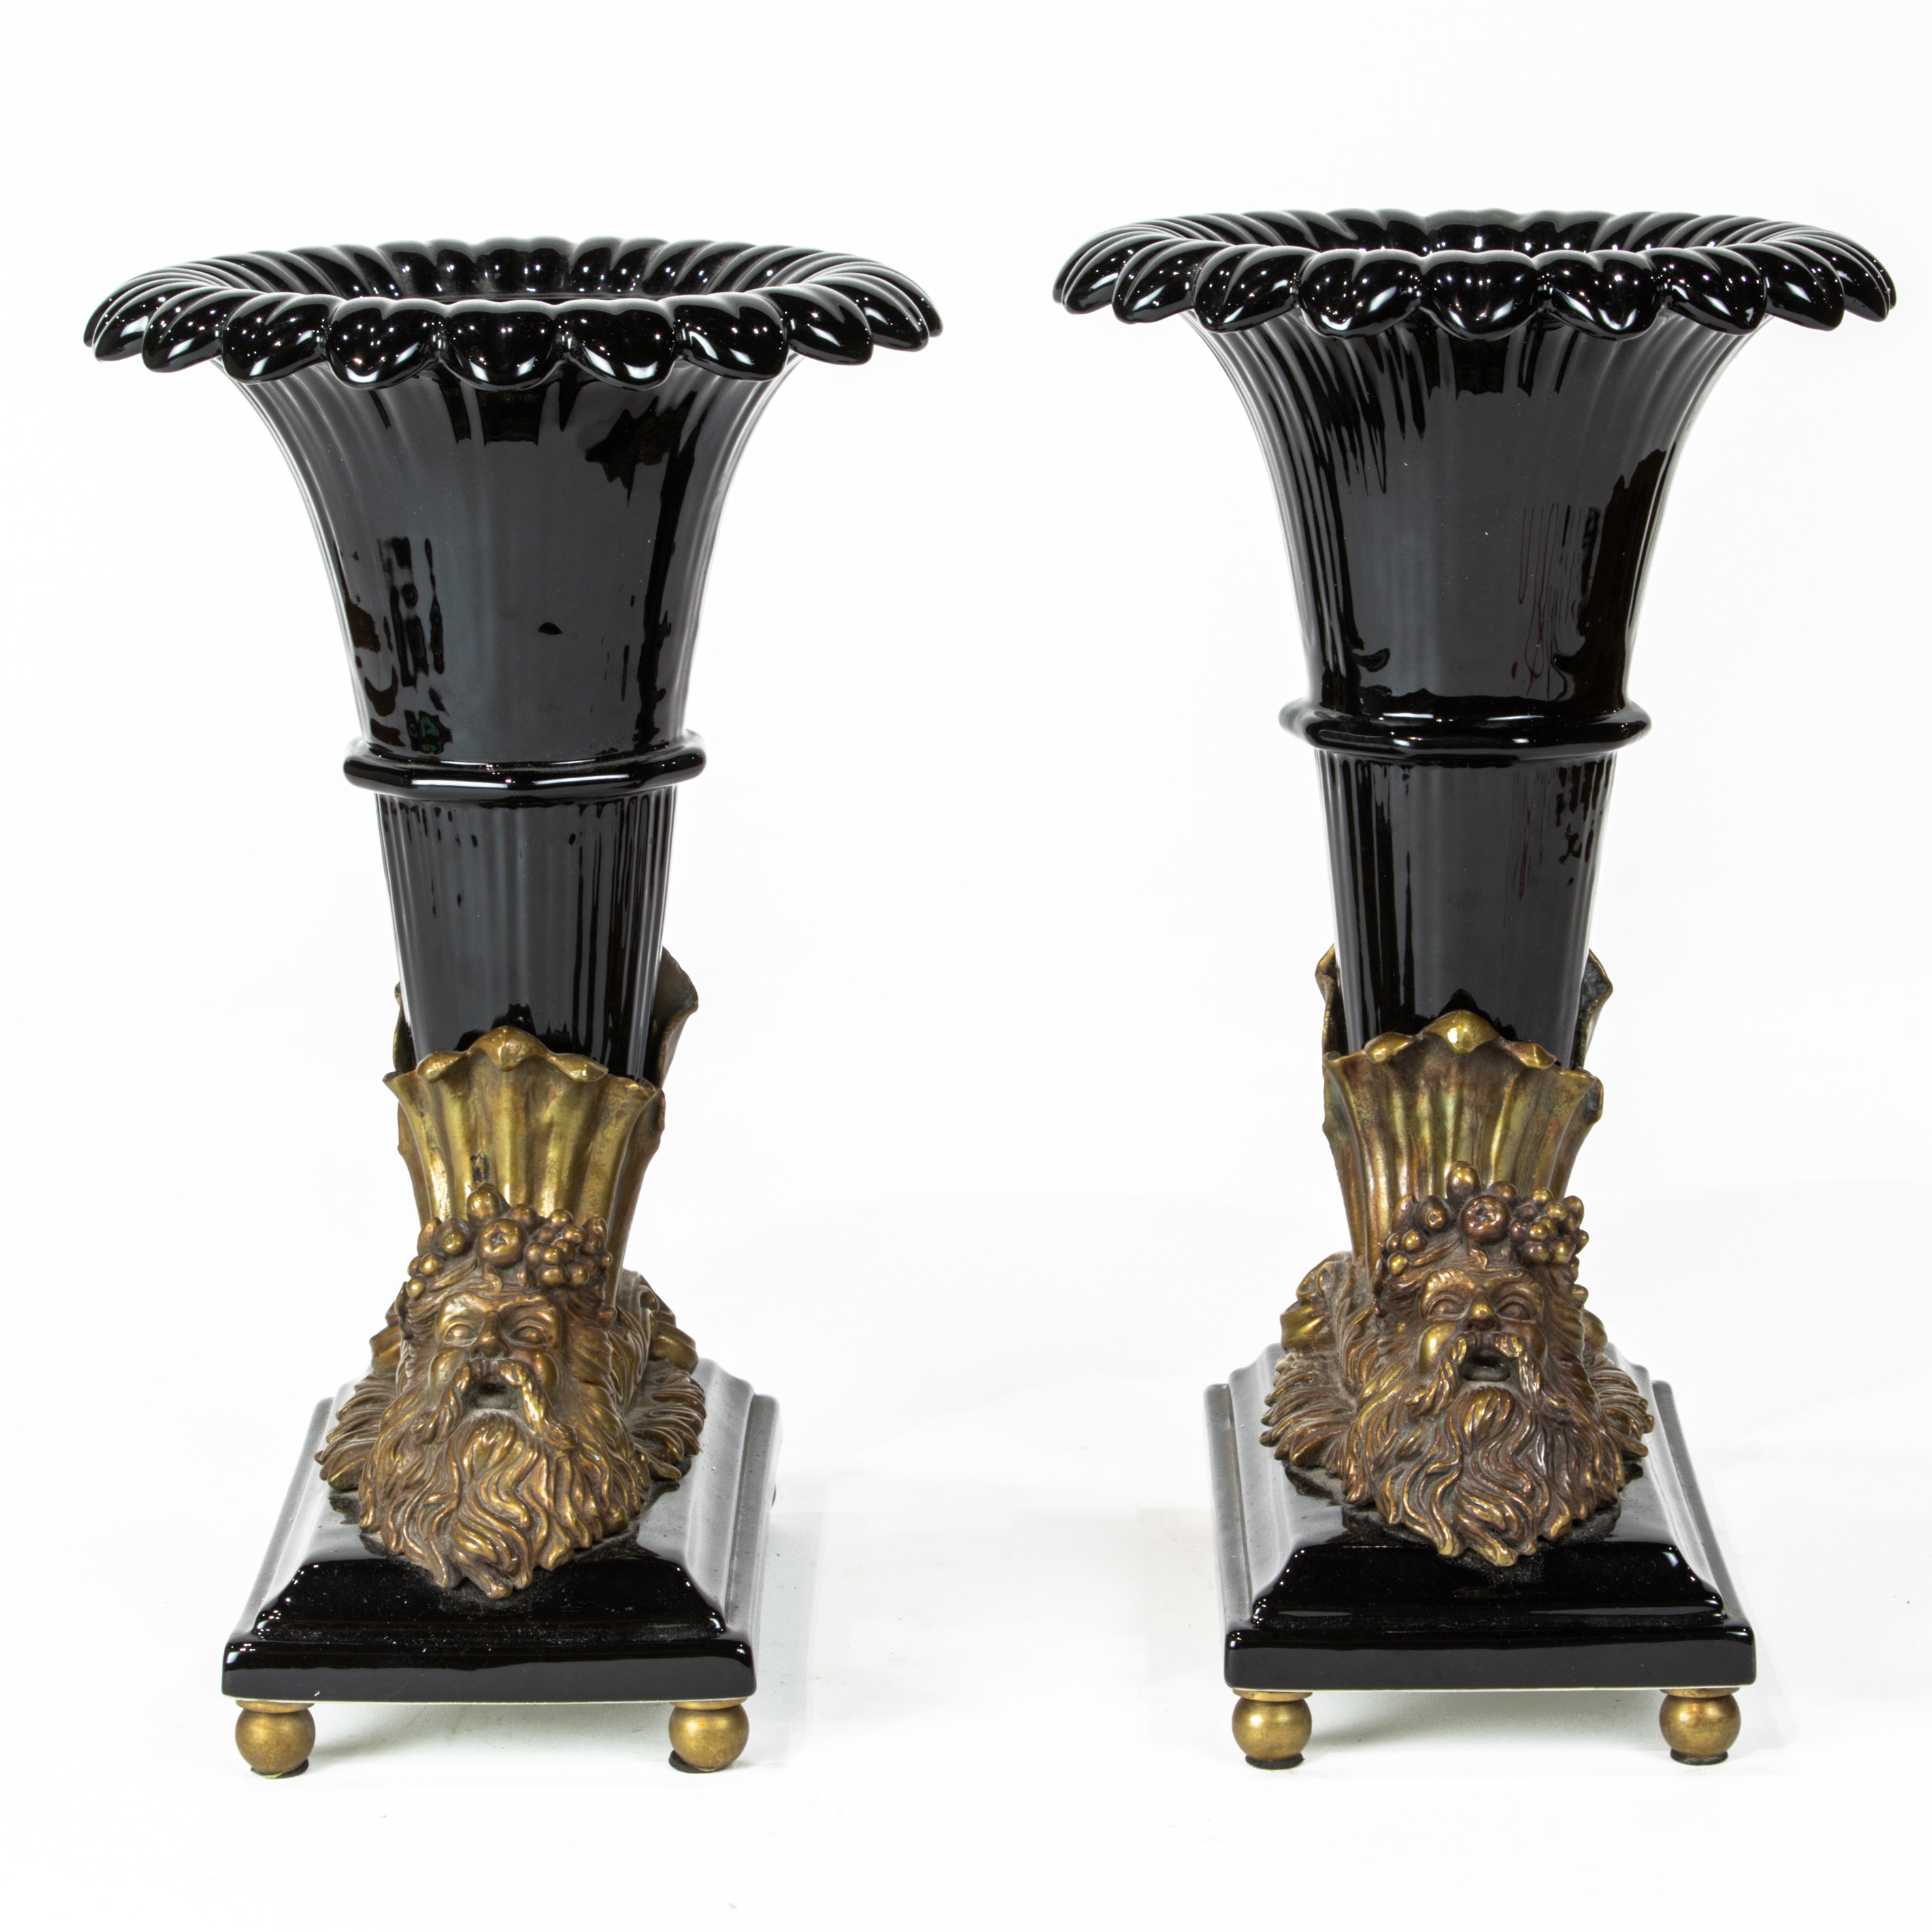 A PAIR OF BRONZE MOUNTED URNS A